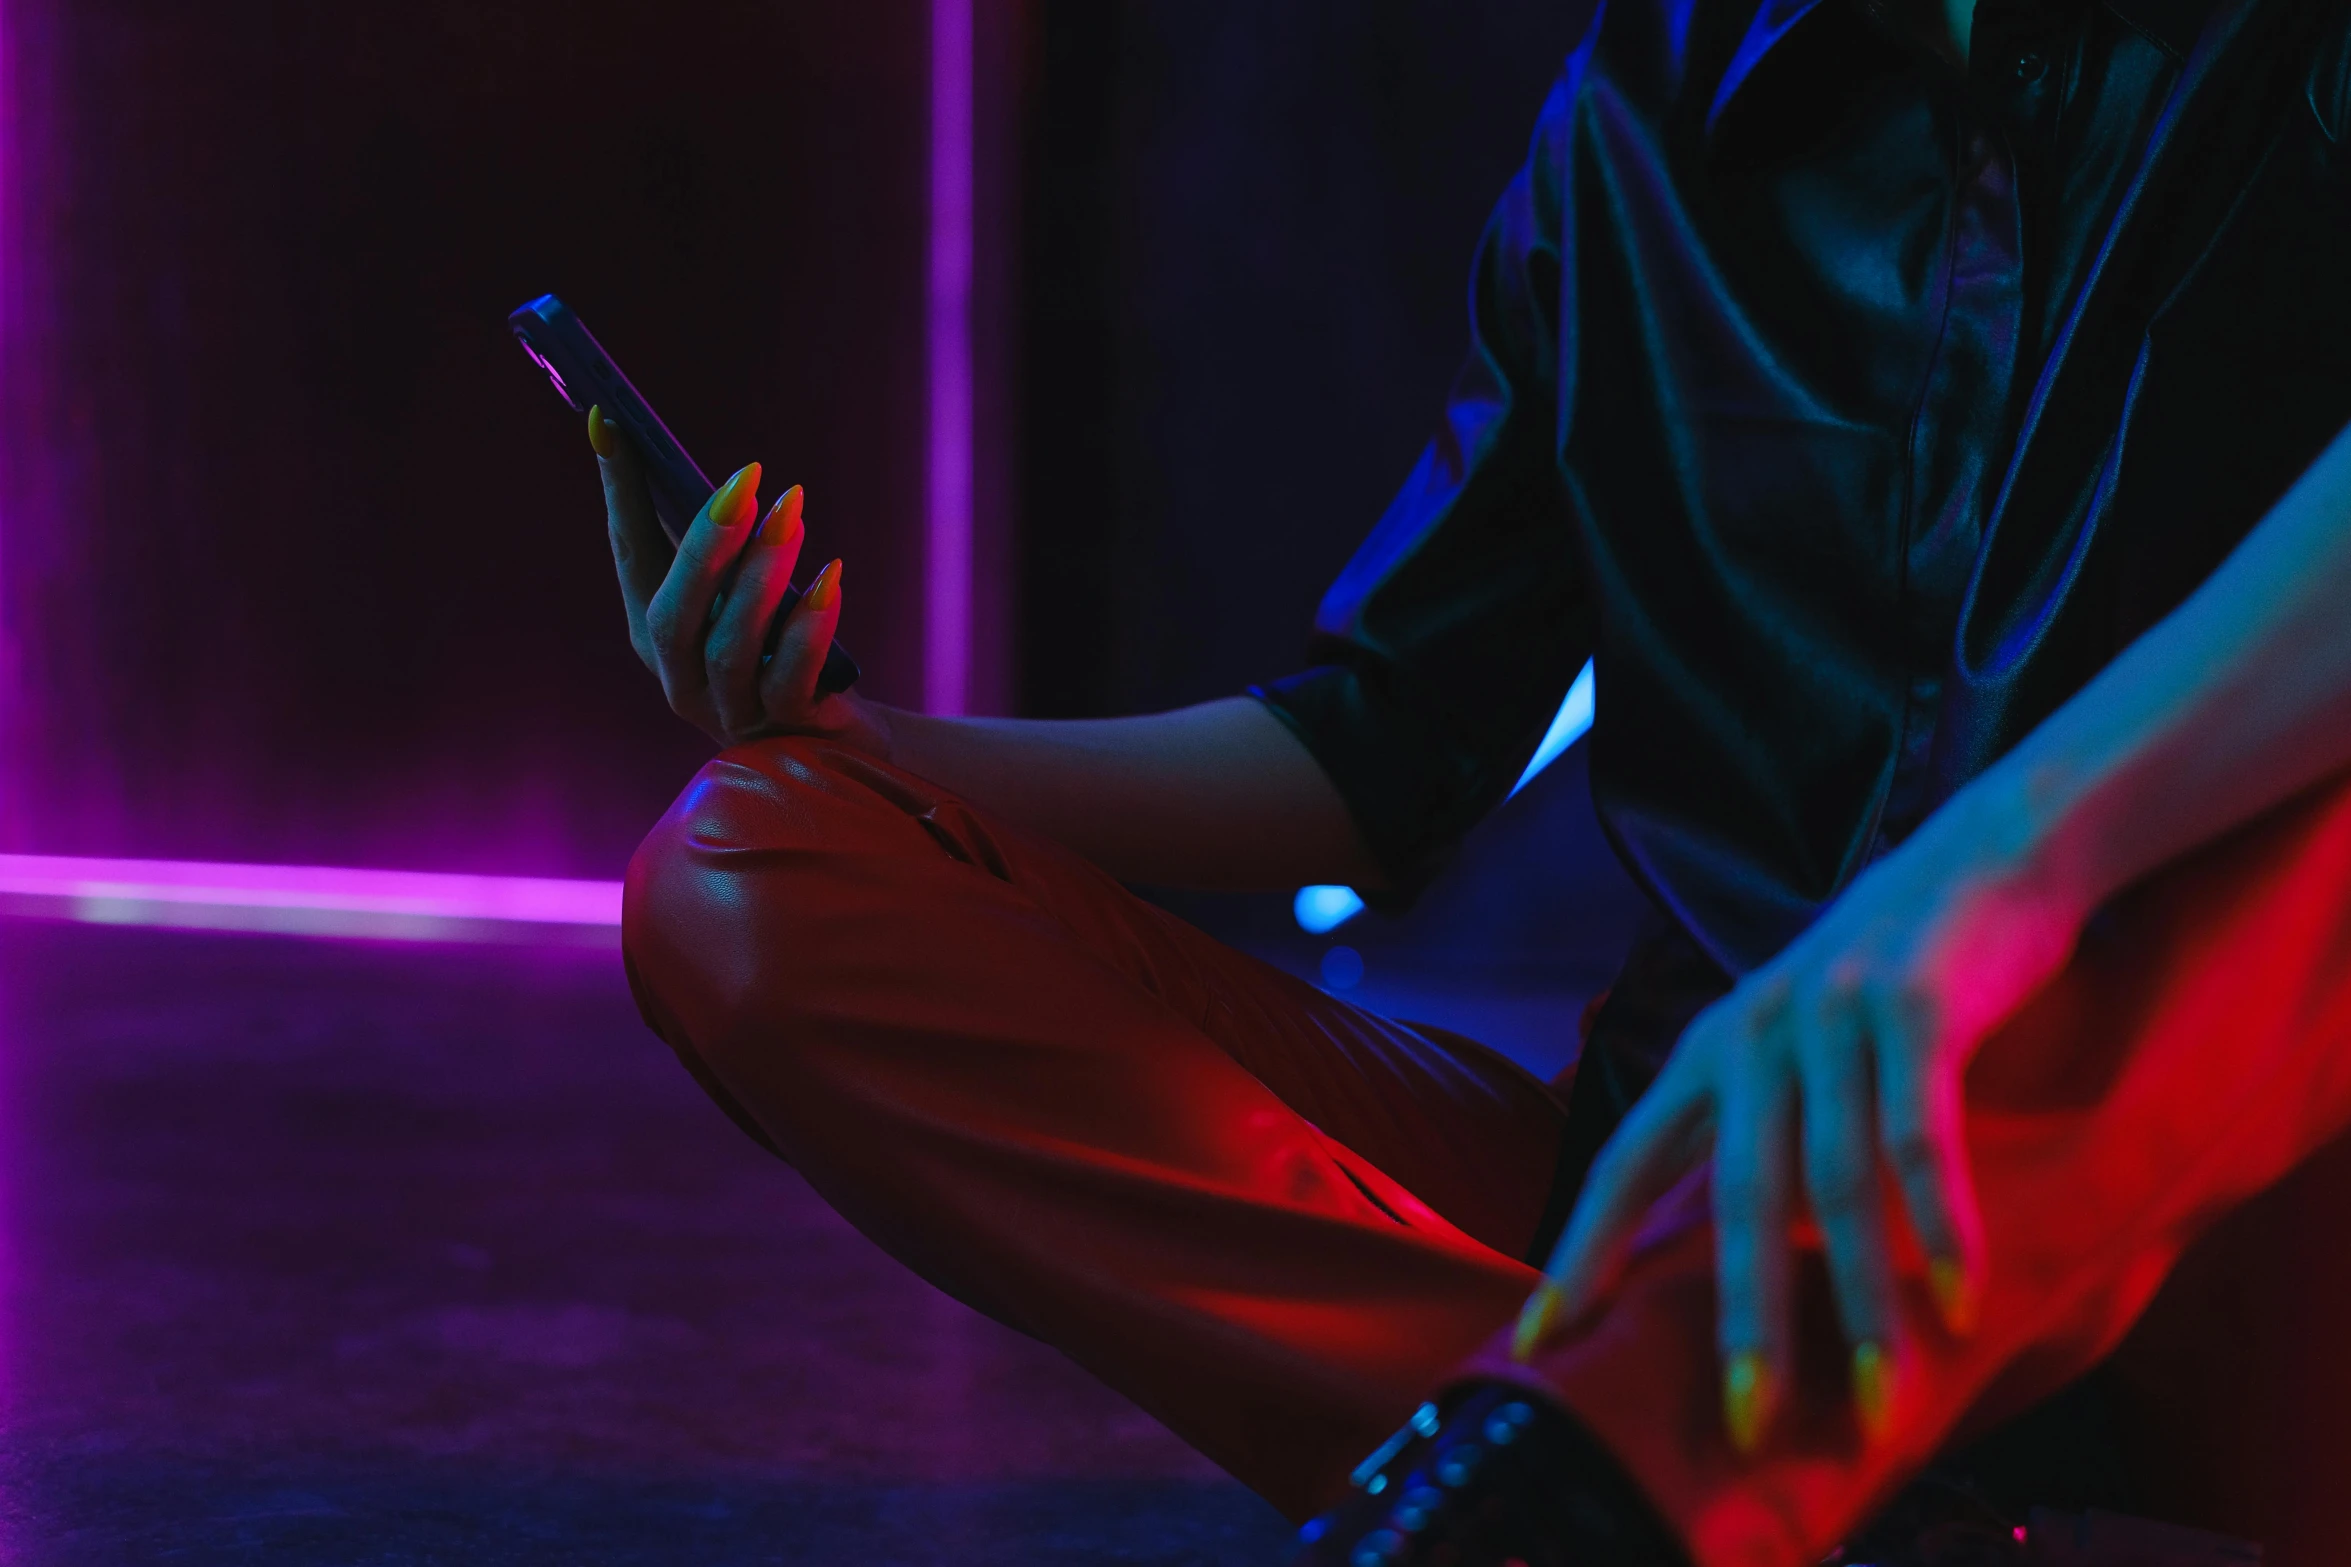 a person sitting on the ground using a cell phone, in a strip club, muted neon colors, red and obsidian neon, cyber aesthetic